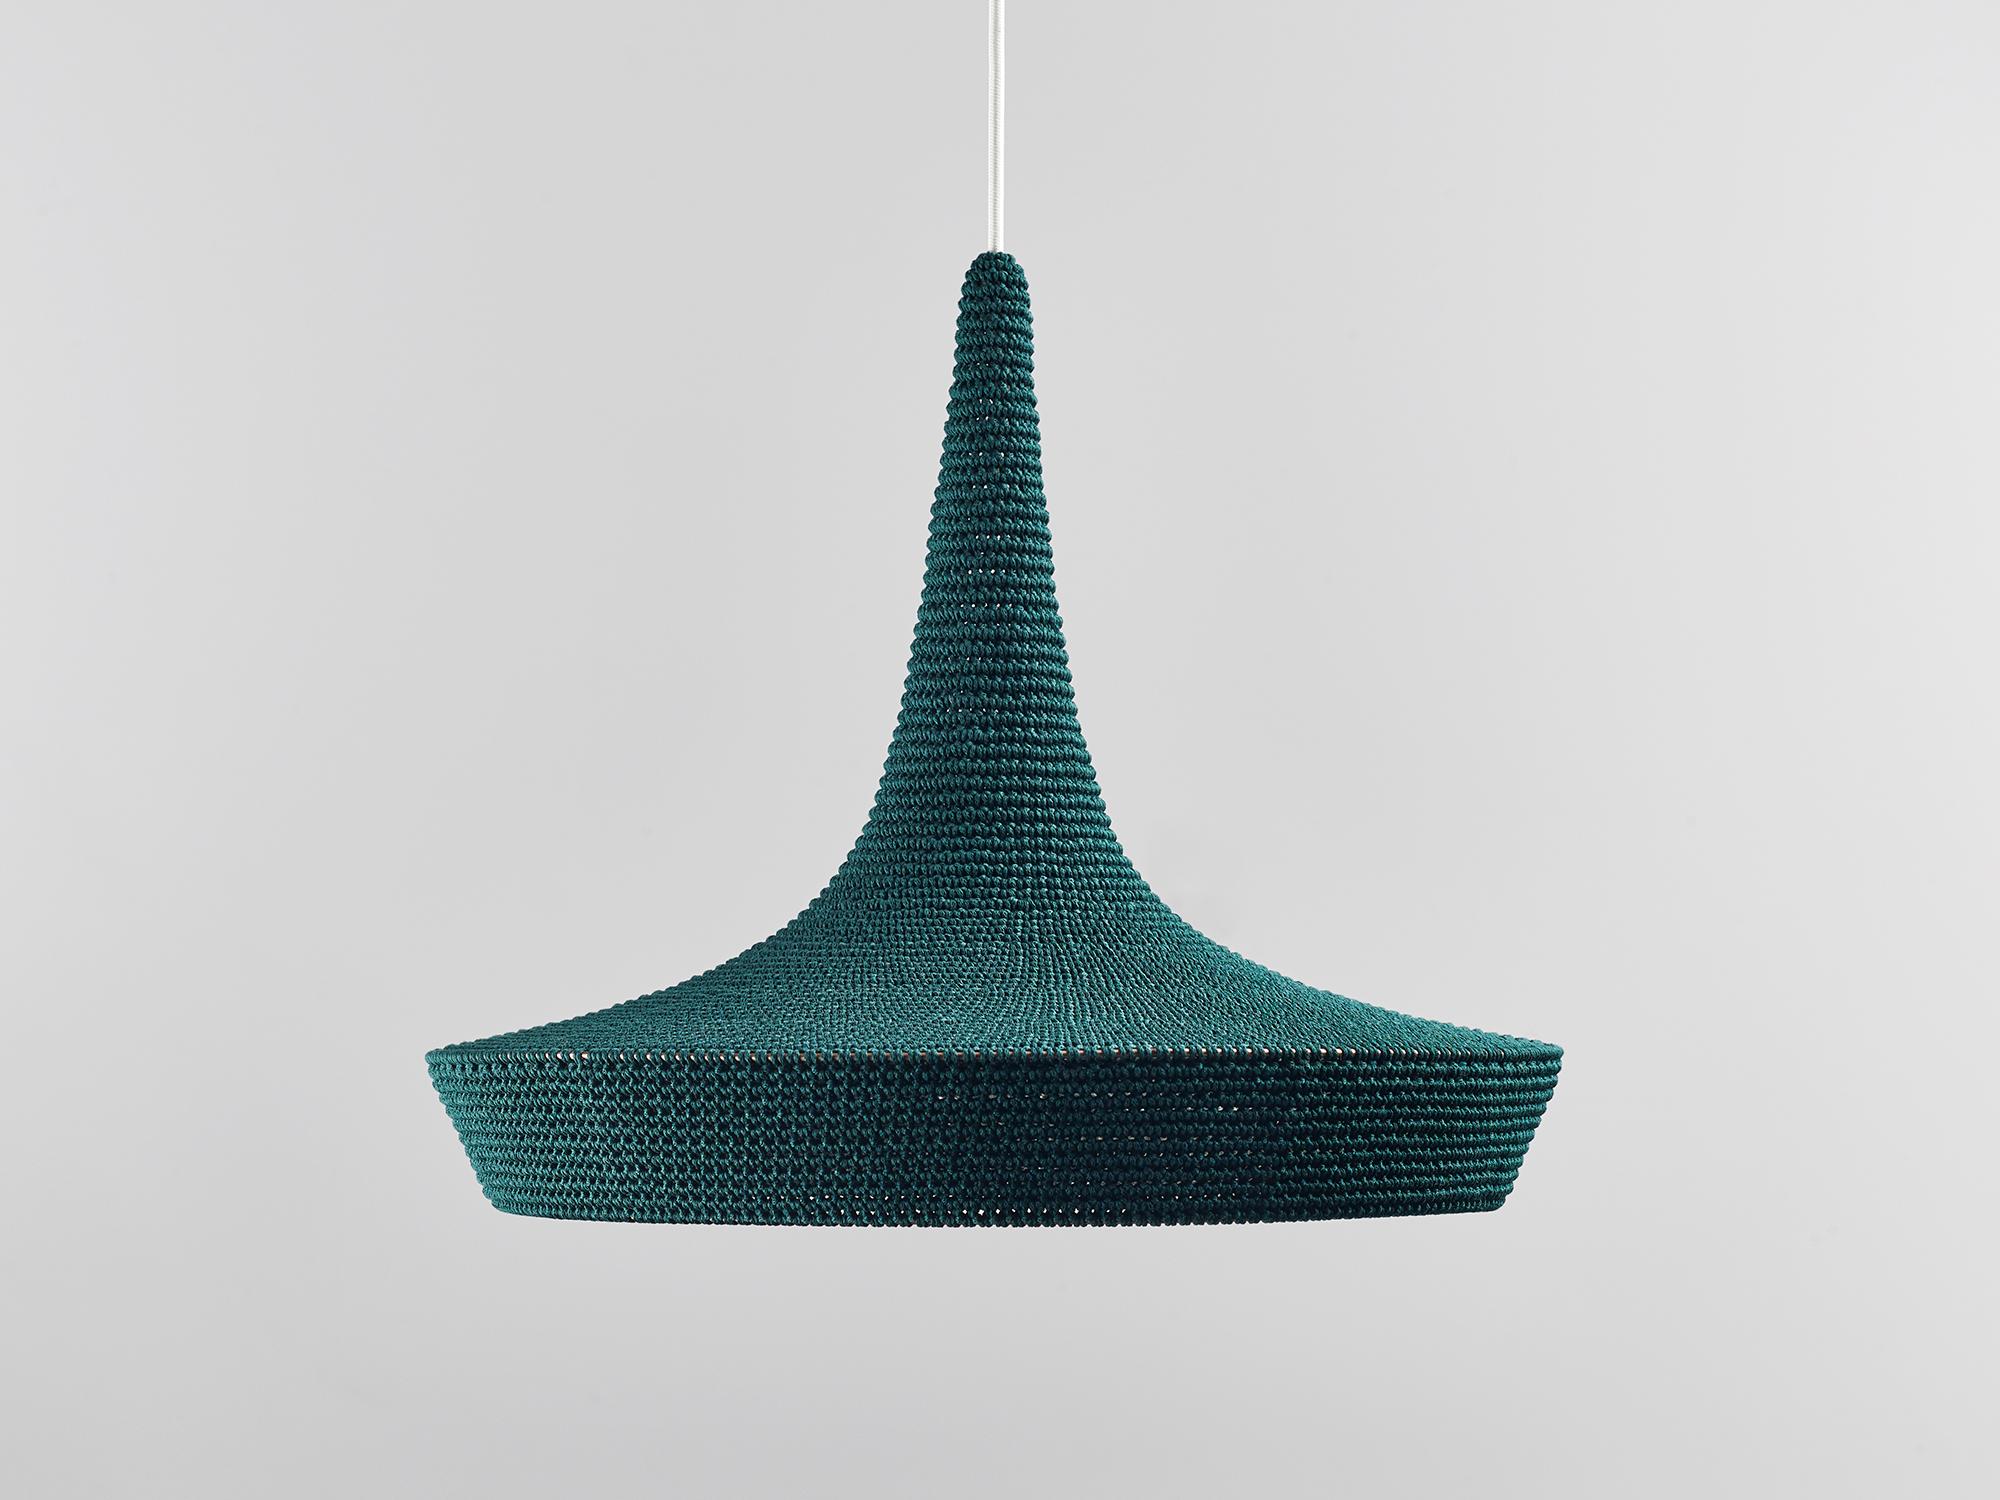 Small V2 Glück pendant lamp by Naomi Paul
Dimensions: D 50 x H 45 cm
Materials: Metal frame, Egyptian cotton cord.
Color: Alpine with Alpine Marl inside edge.
Available in other colors and in 3 sizes: D 50, D 60, D 80 cm.
Available in Inside